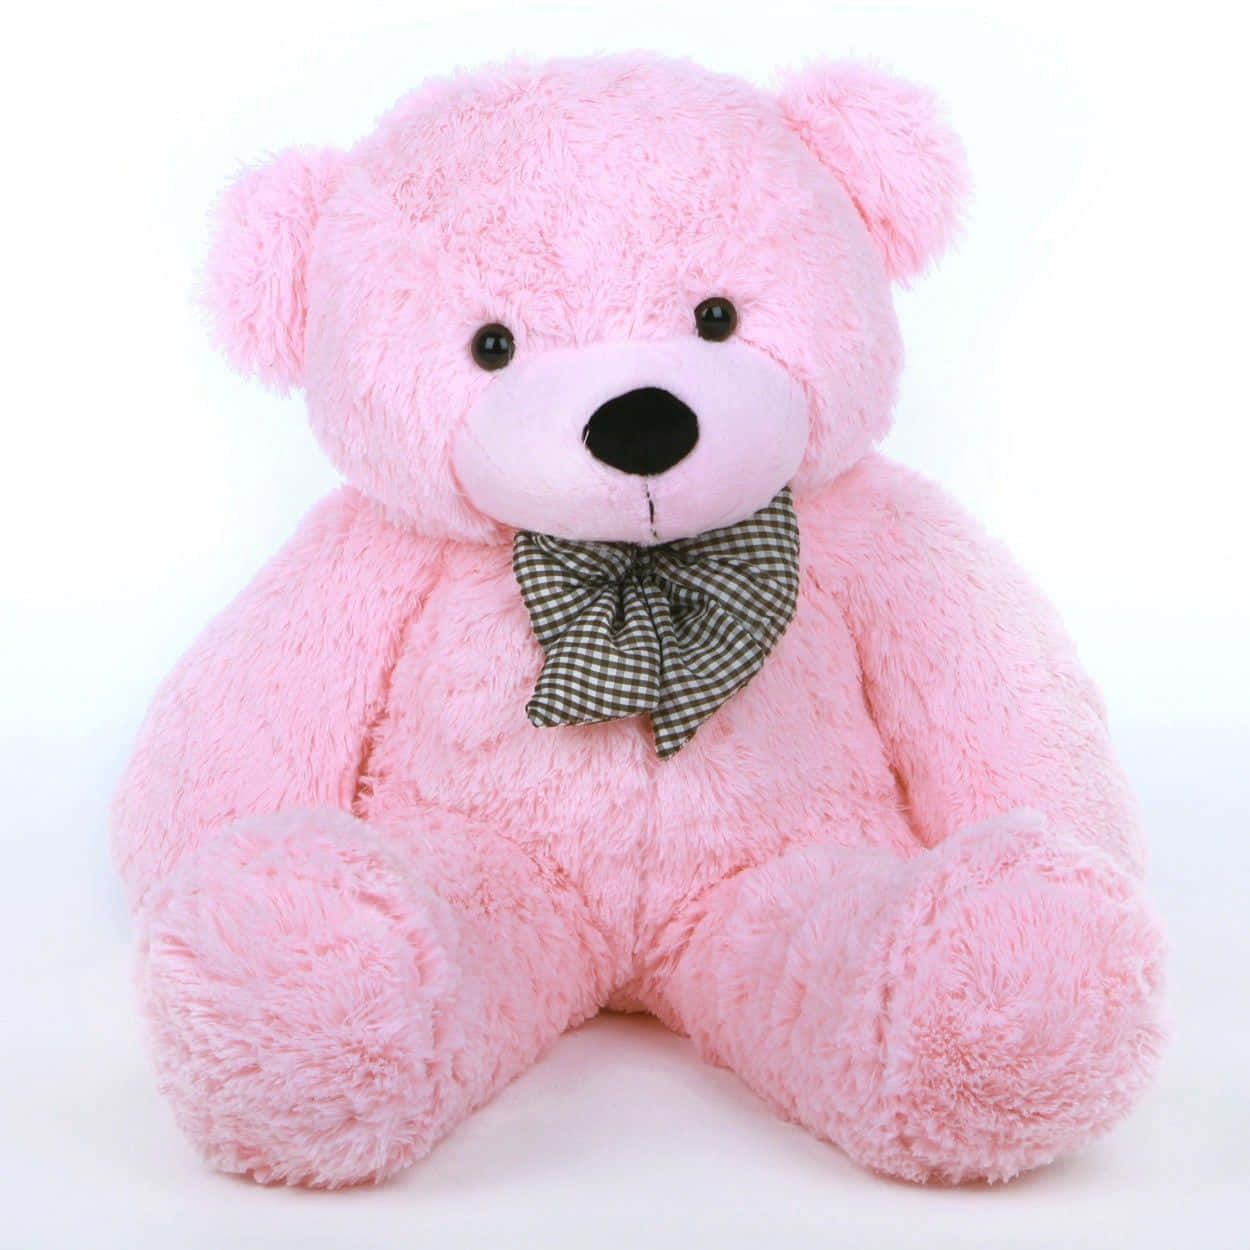 A Charming Pink Teddy Bear With A Loving Heart. Background